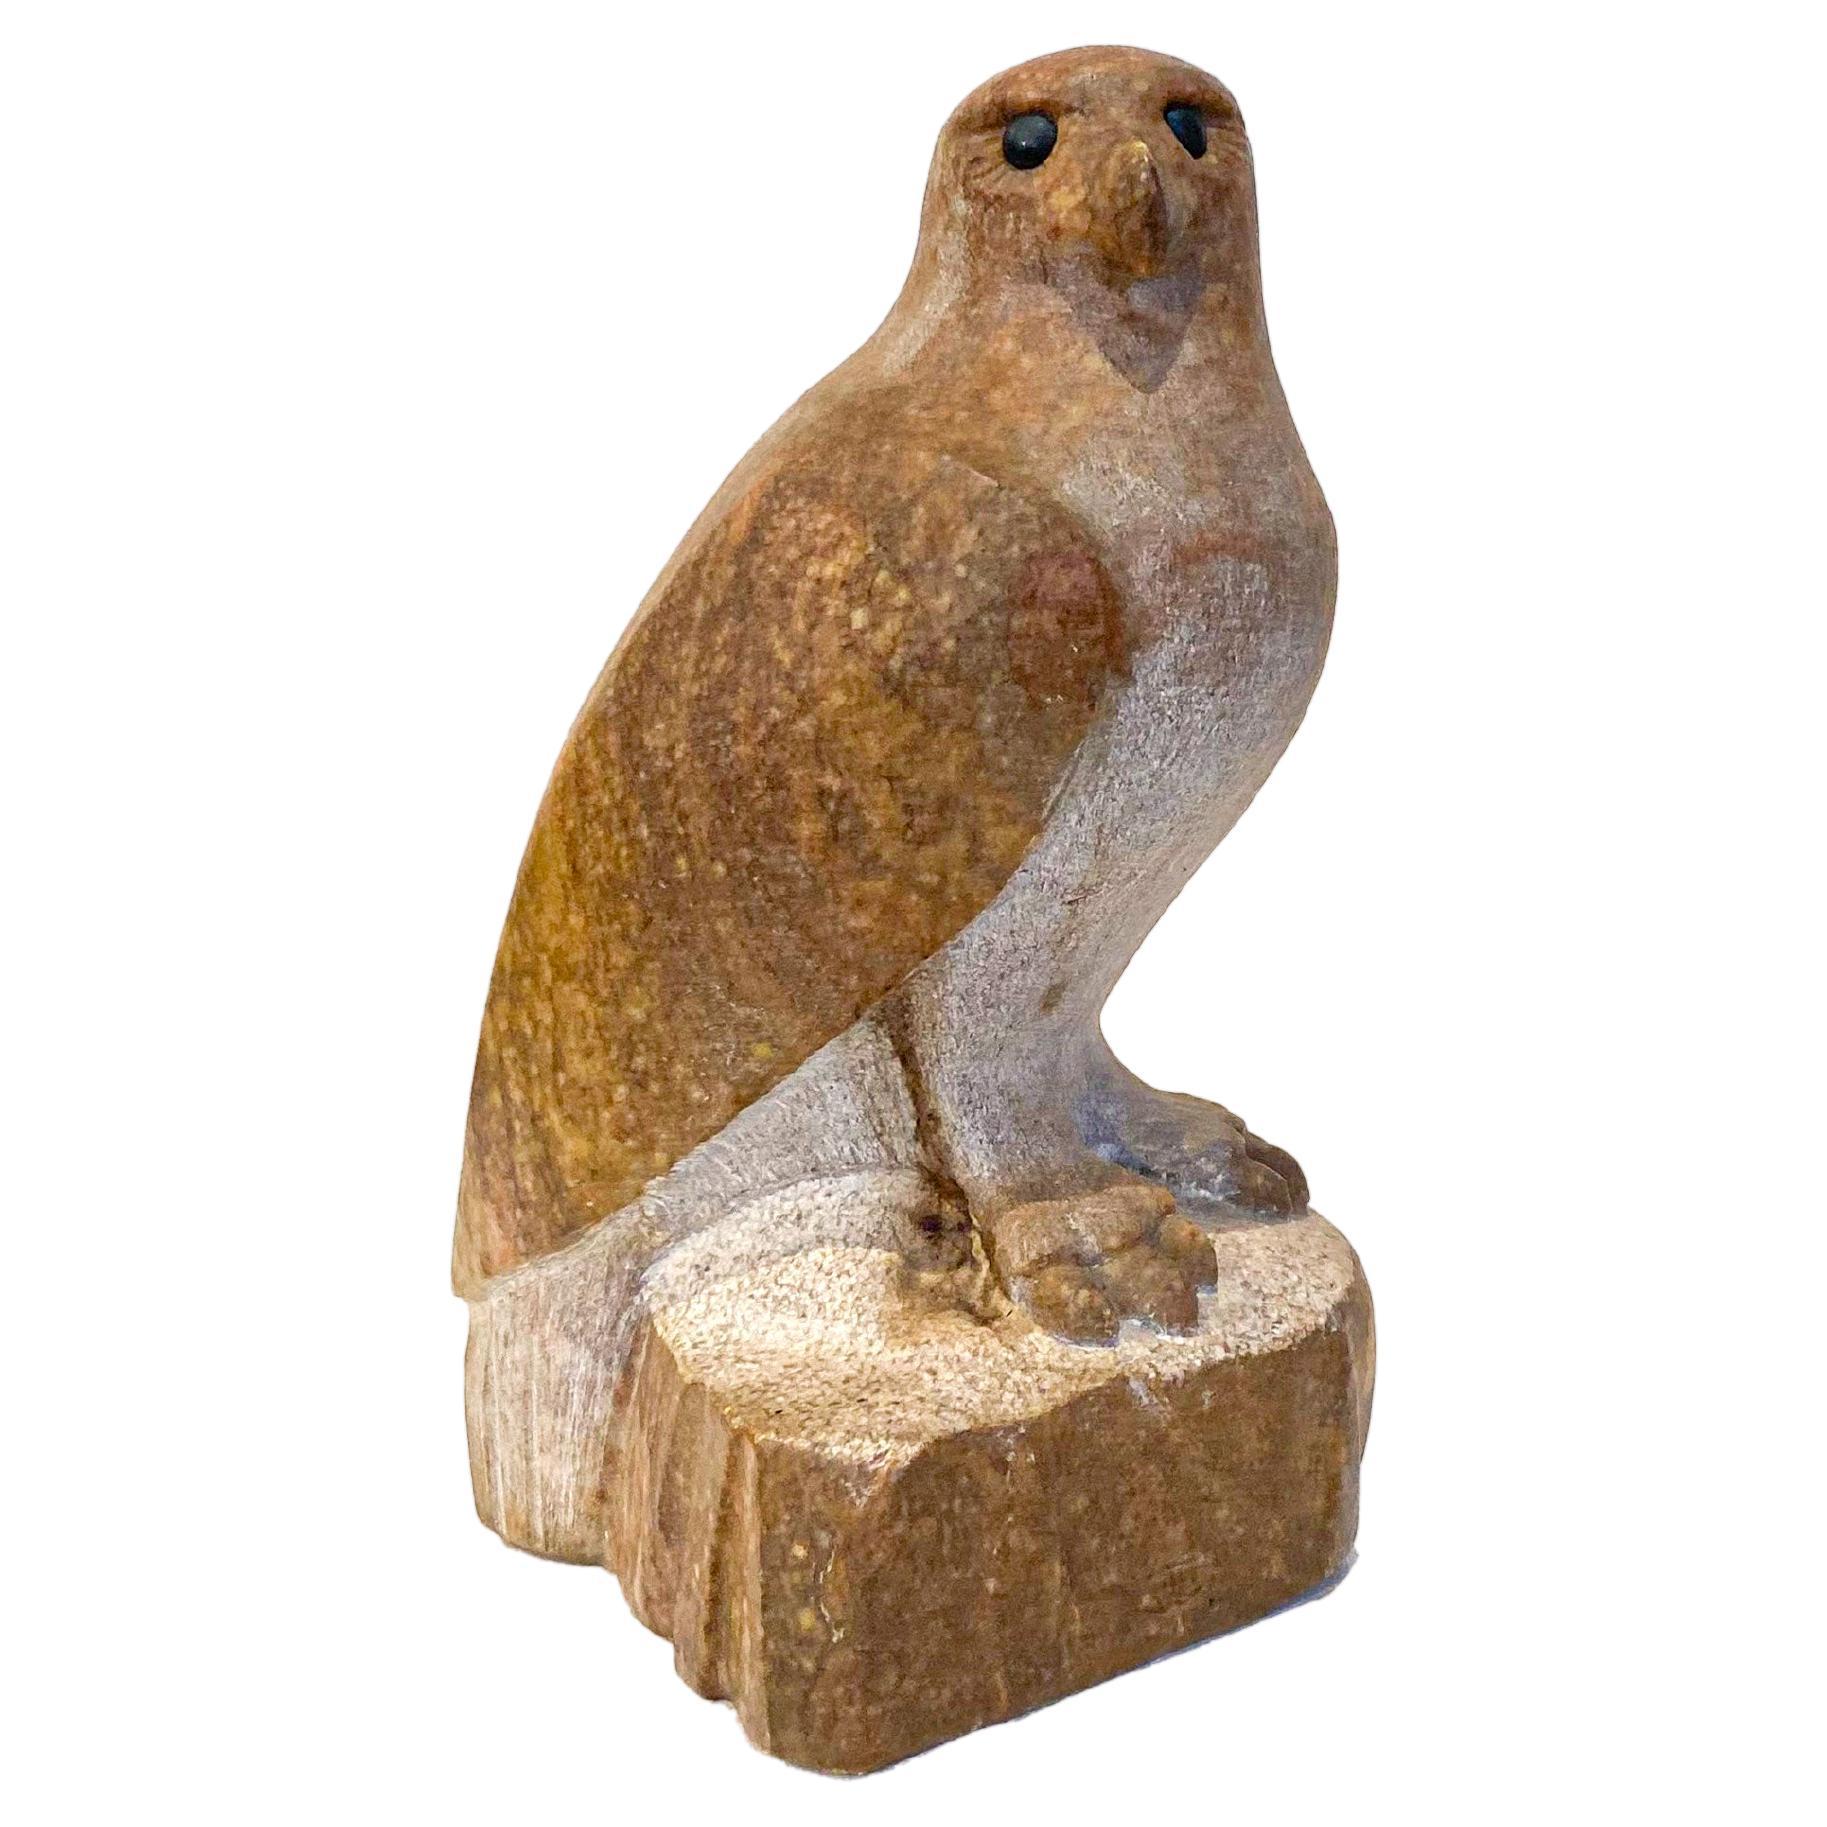 Sandstone Carving of a Peregrine Falcon